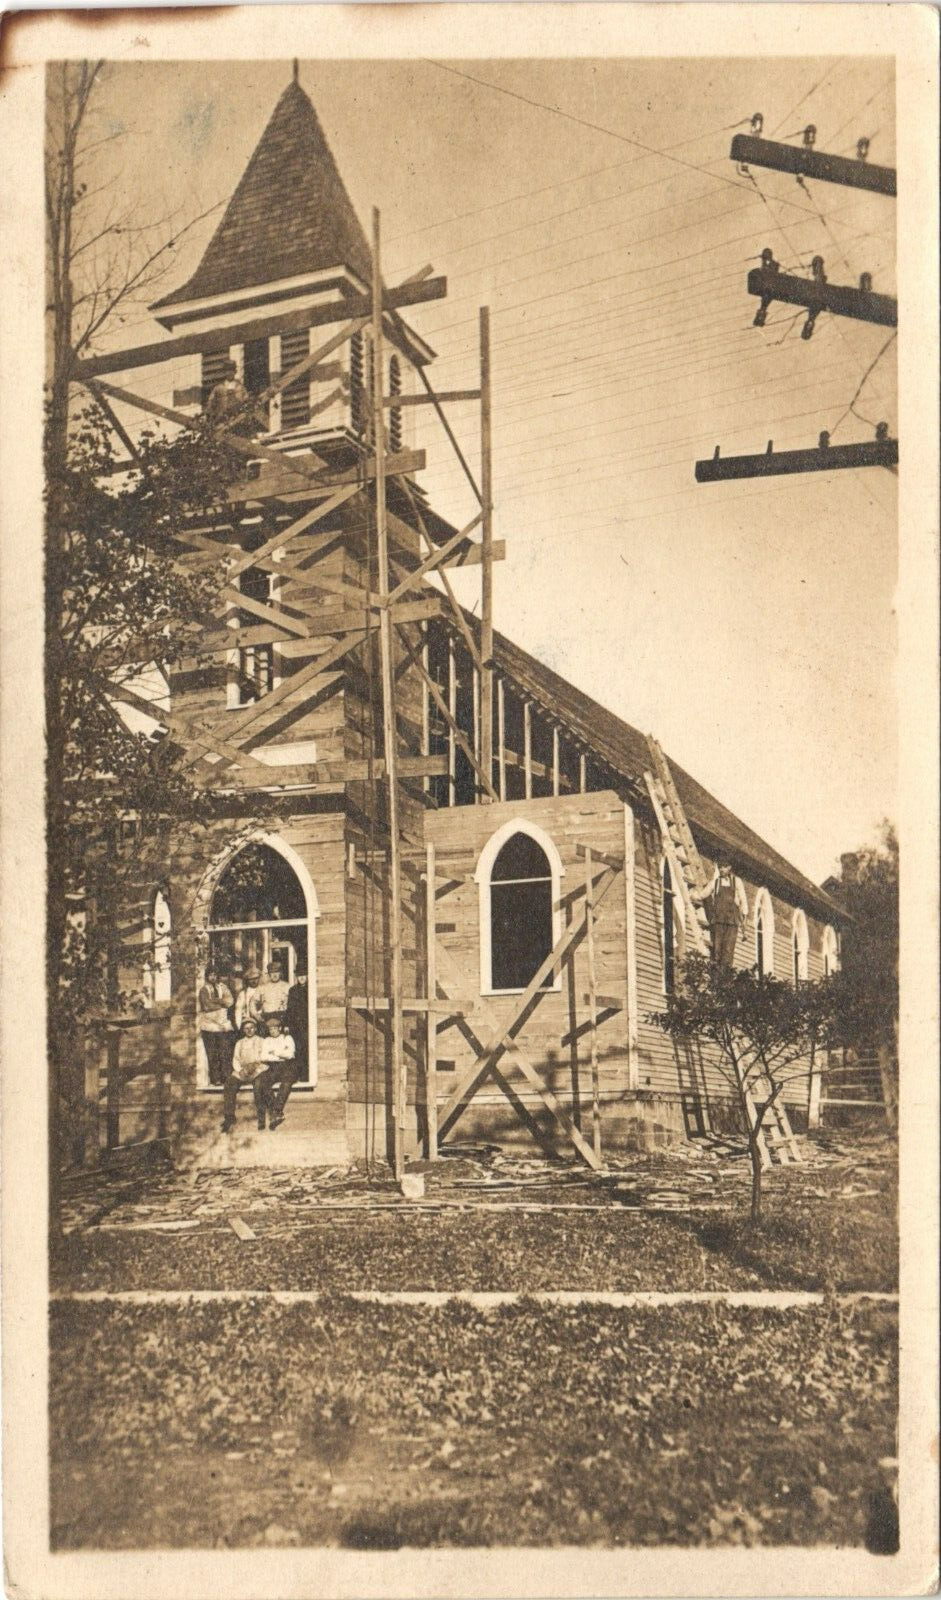 CHURCH CONSTRUCTION antique real photo postcard rppc OCCUPATIONAL BUILDING CREW